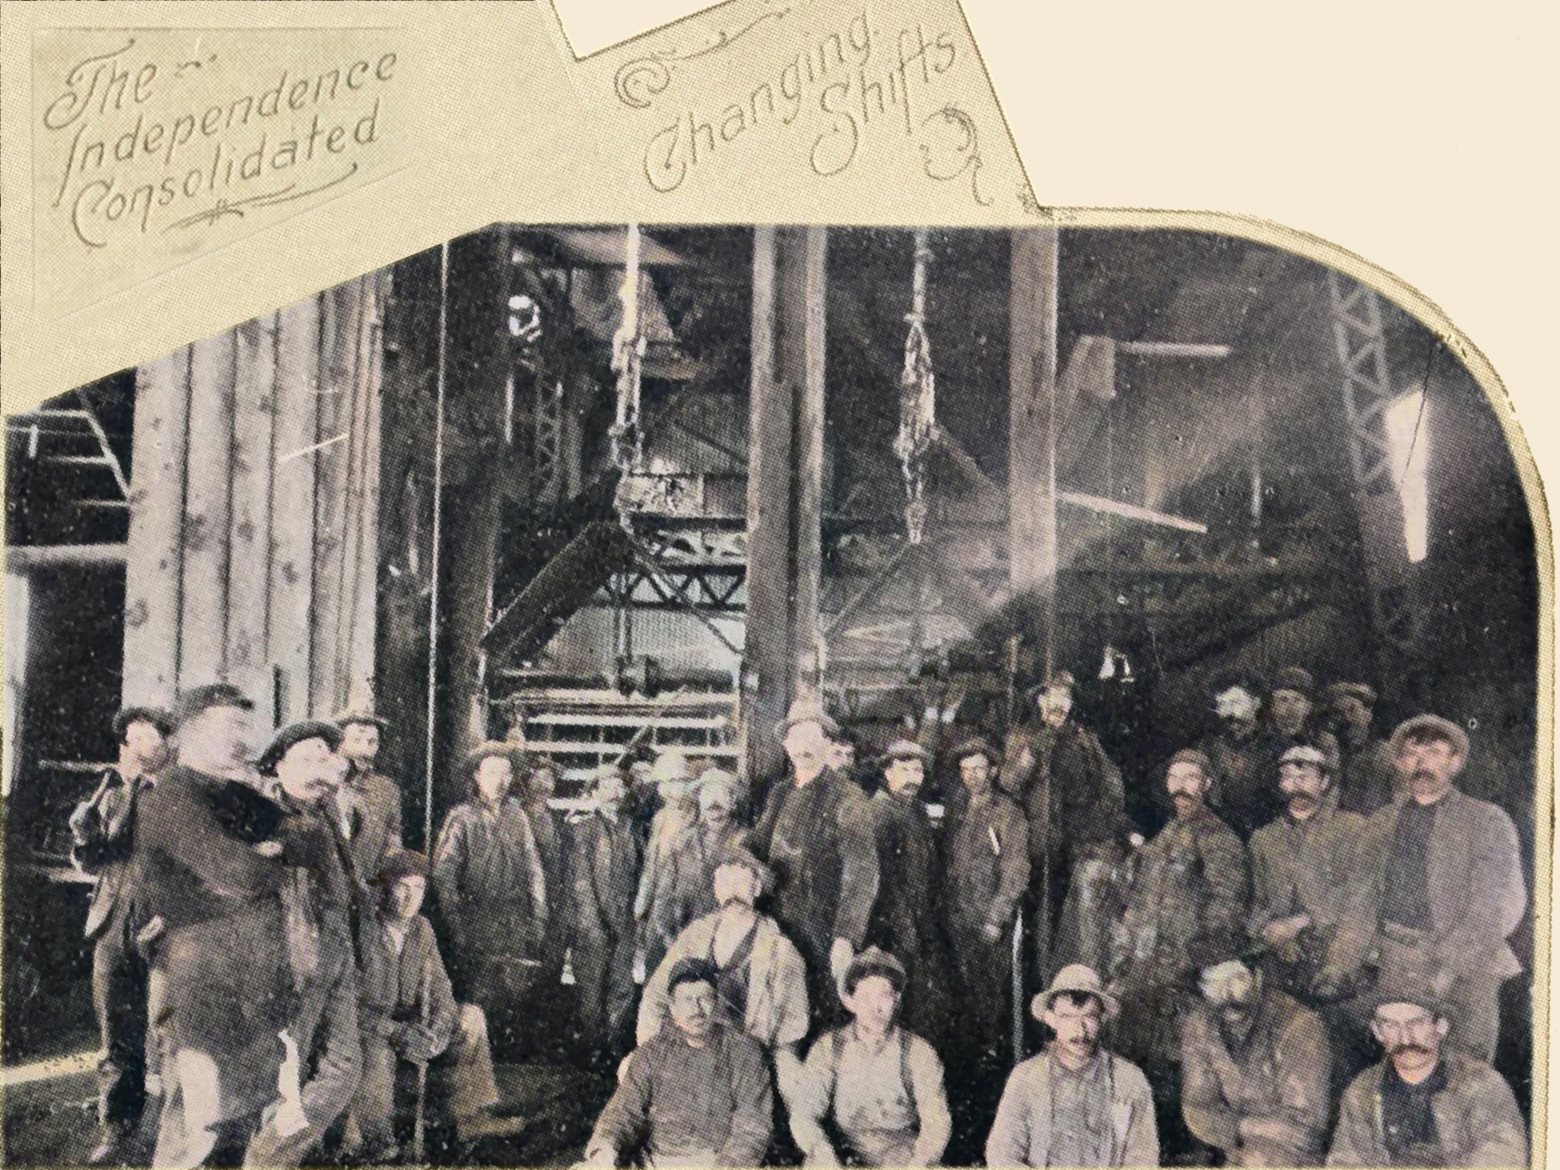 This sadly not so good quality view of the interior at the Shaft of the Hull City Mine is still though an important catching of a scene at the timeframe it is from. A large group of Miners are posing to get captured as there is a change of Shifts at the Hull City mine. We can see there are two cages behind them, saying this is a huge operation at this time.
   I did procure the colored version of this image. Source was grayish, or in common speech black & white. Used an online service and tweaked and worked with image to get what looks best to my eyes at the moment.